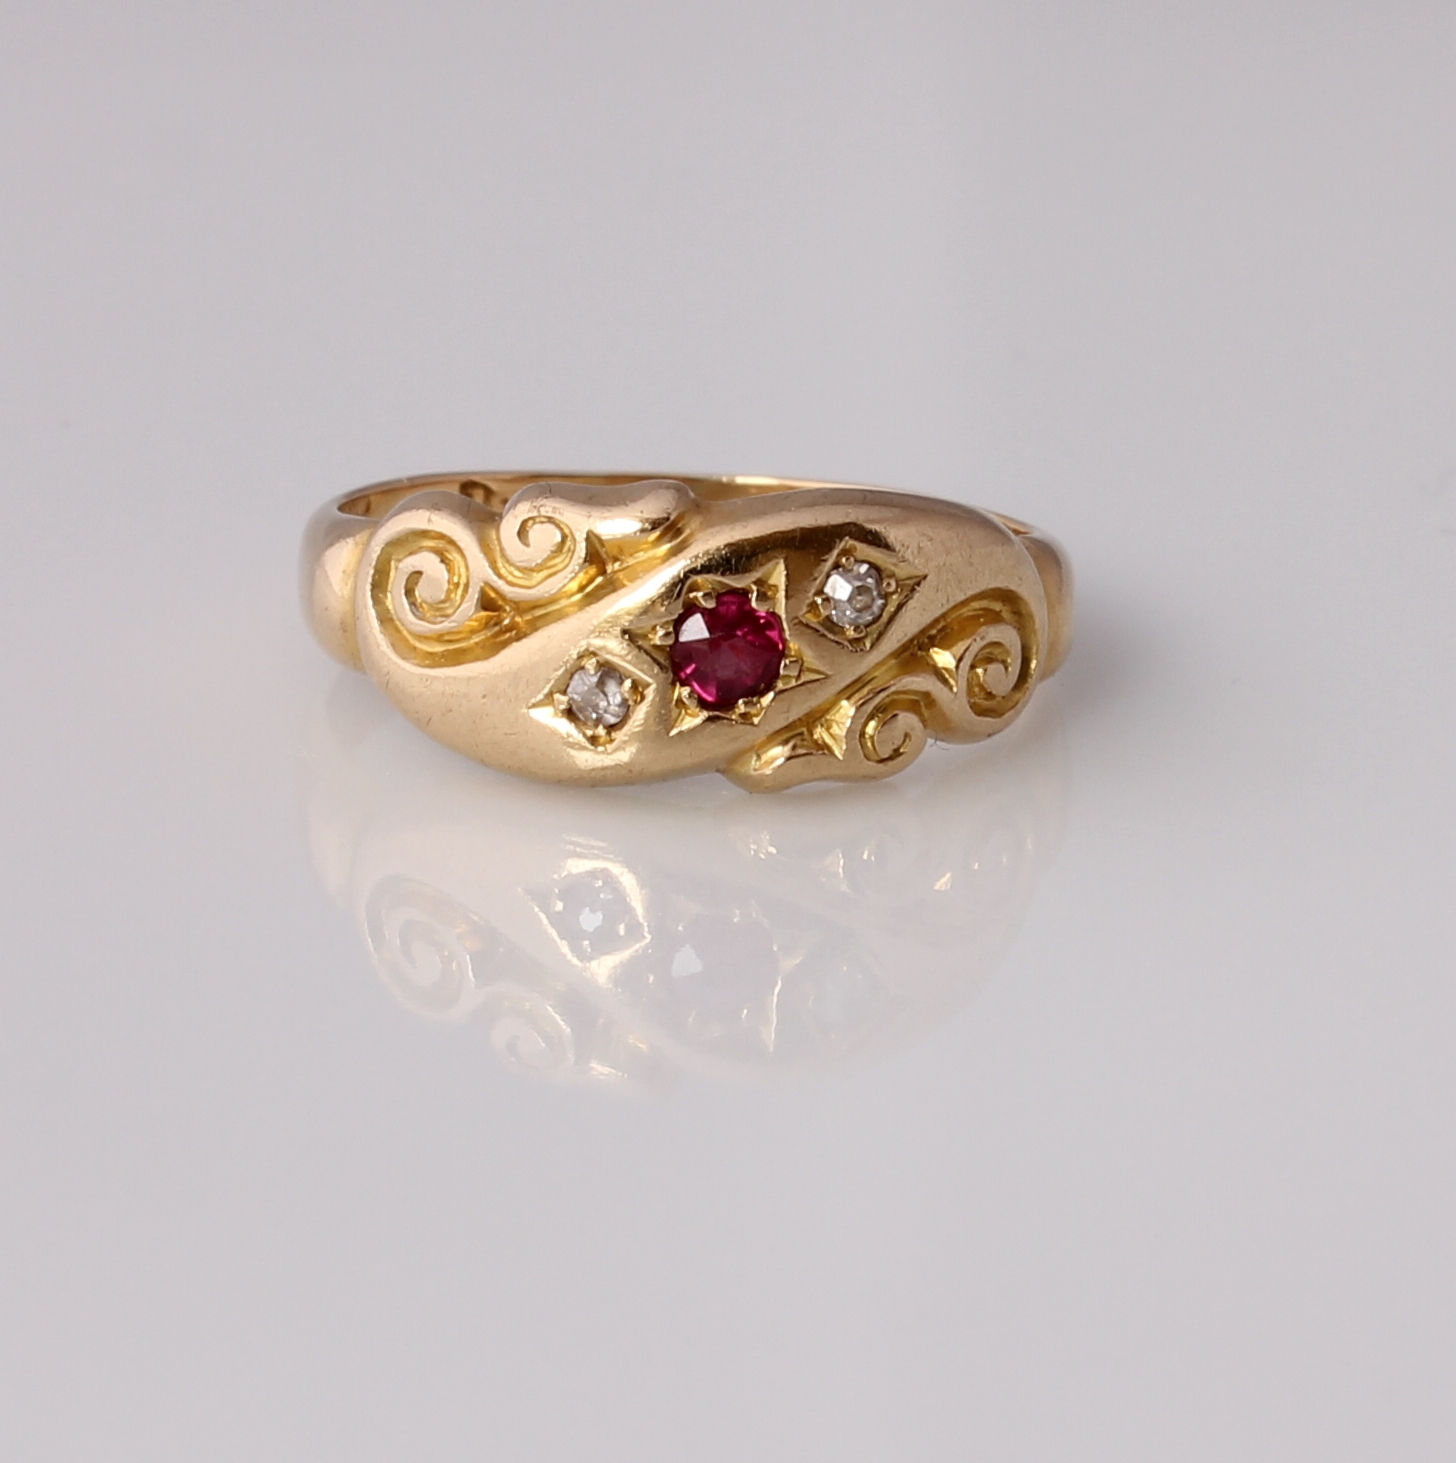 Victorian 18ct Yellow Gold Ruby & Diamond Gypsy Ring. Antique. Size K 1/2